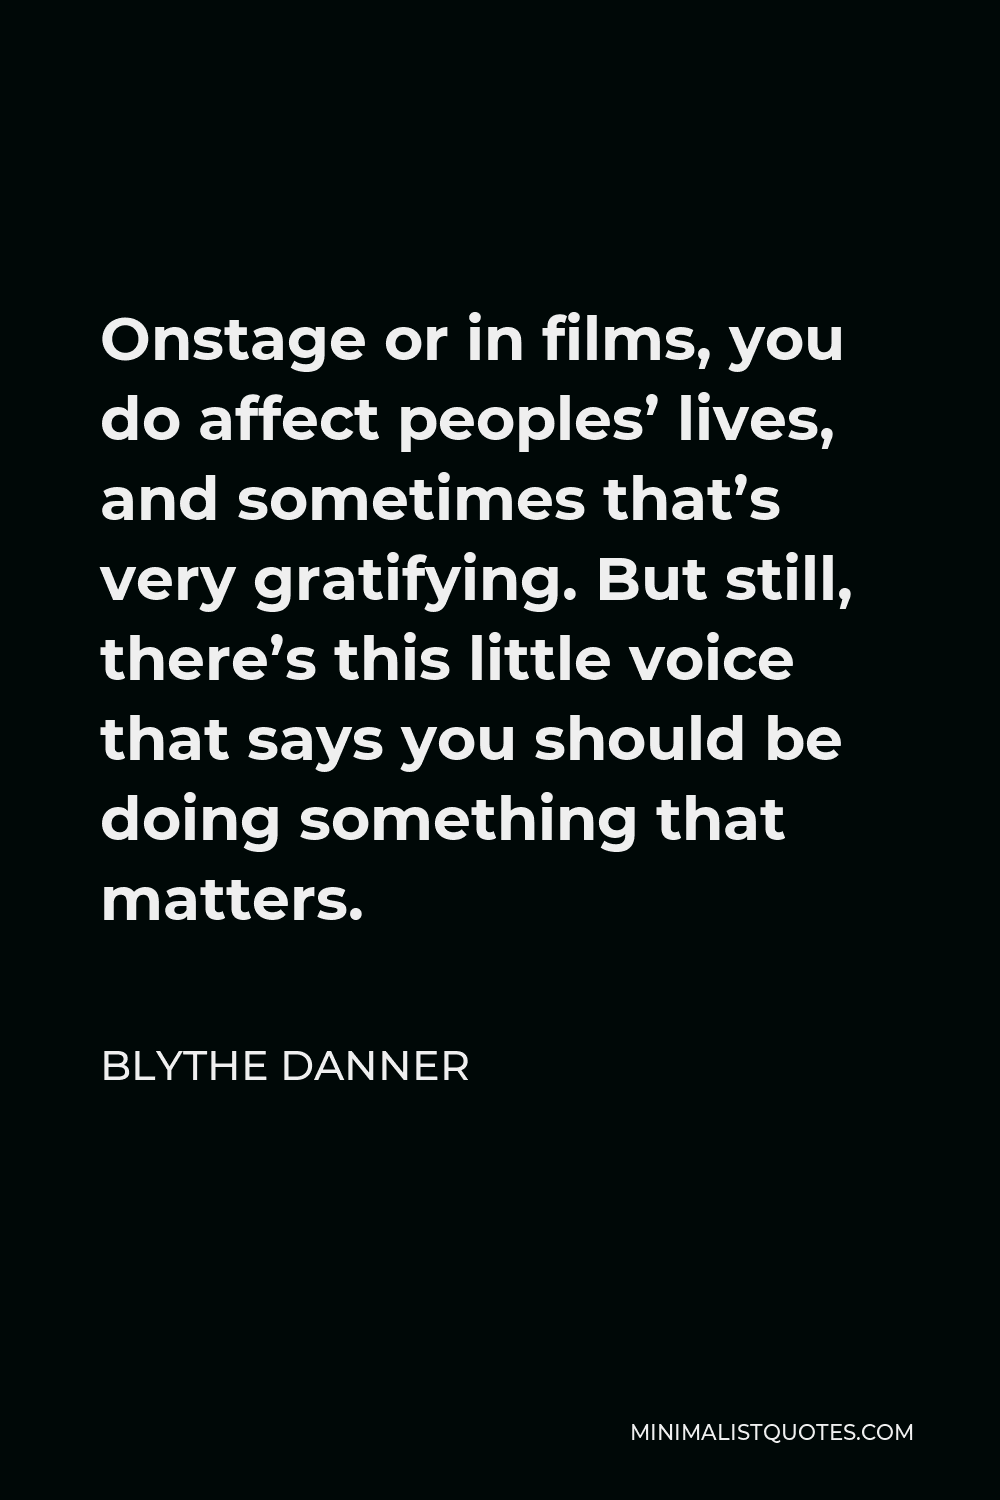 Blythe Danner Quote - Onstage or in films, you do affect peoples’ lives, and sometimes that’s very gratifying. But still, there’s this little voice that says you should be doing something that matters.